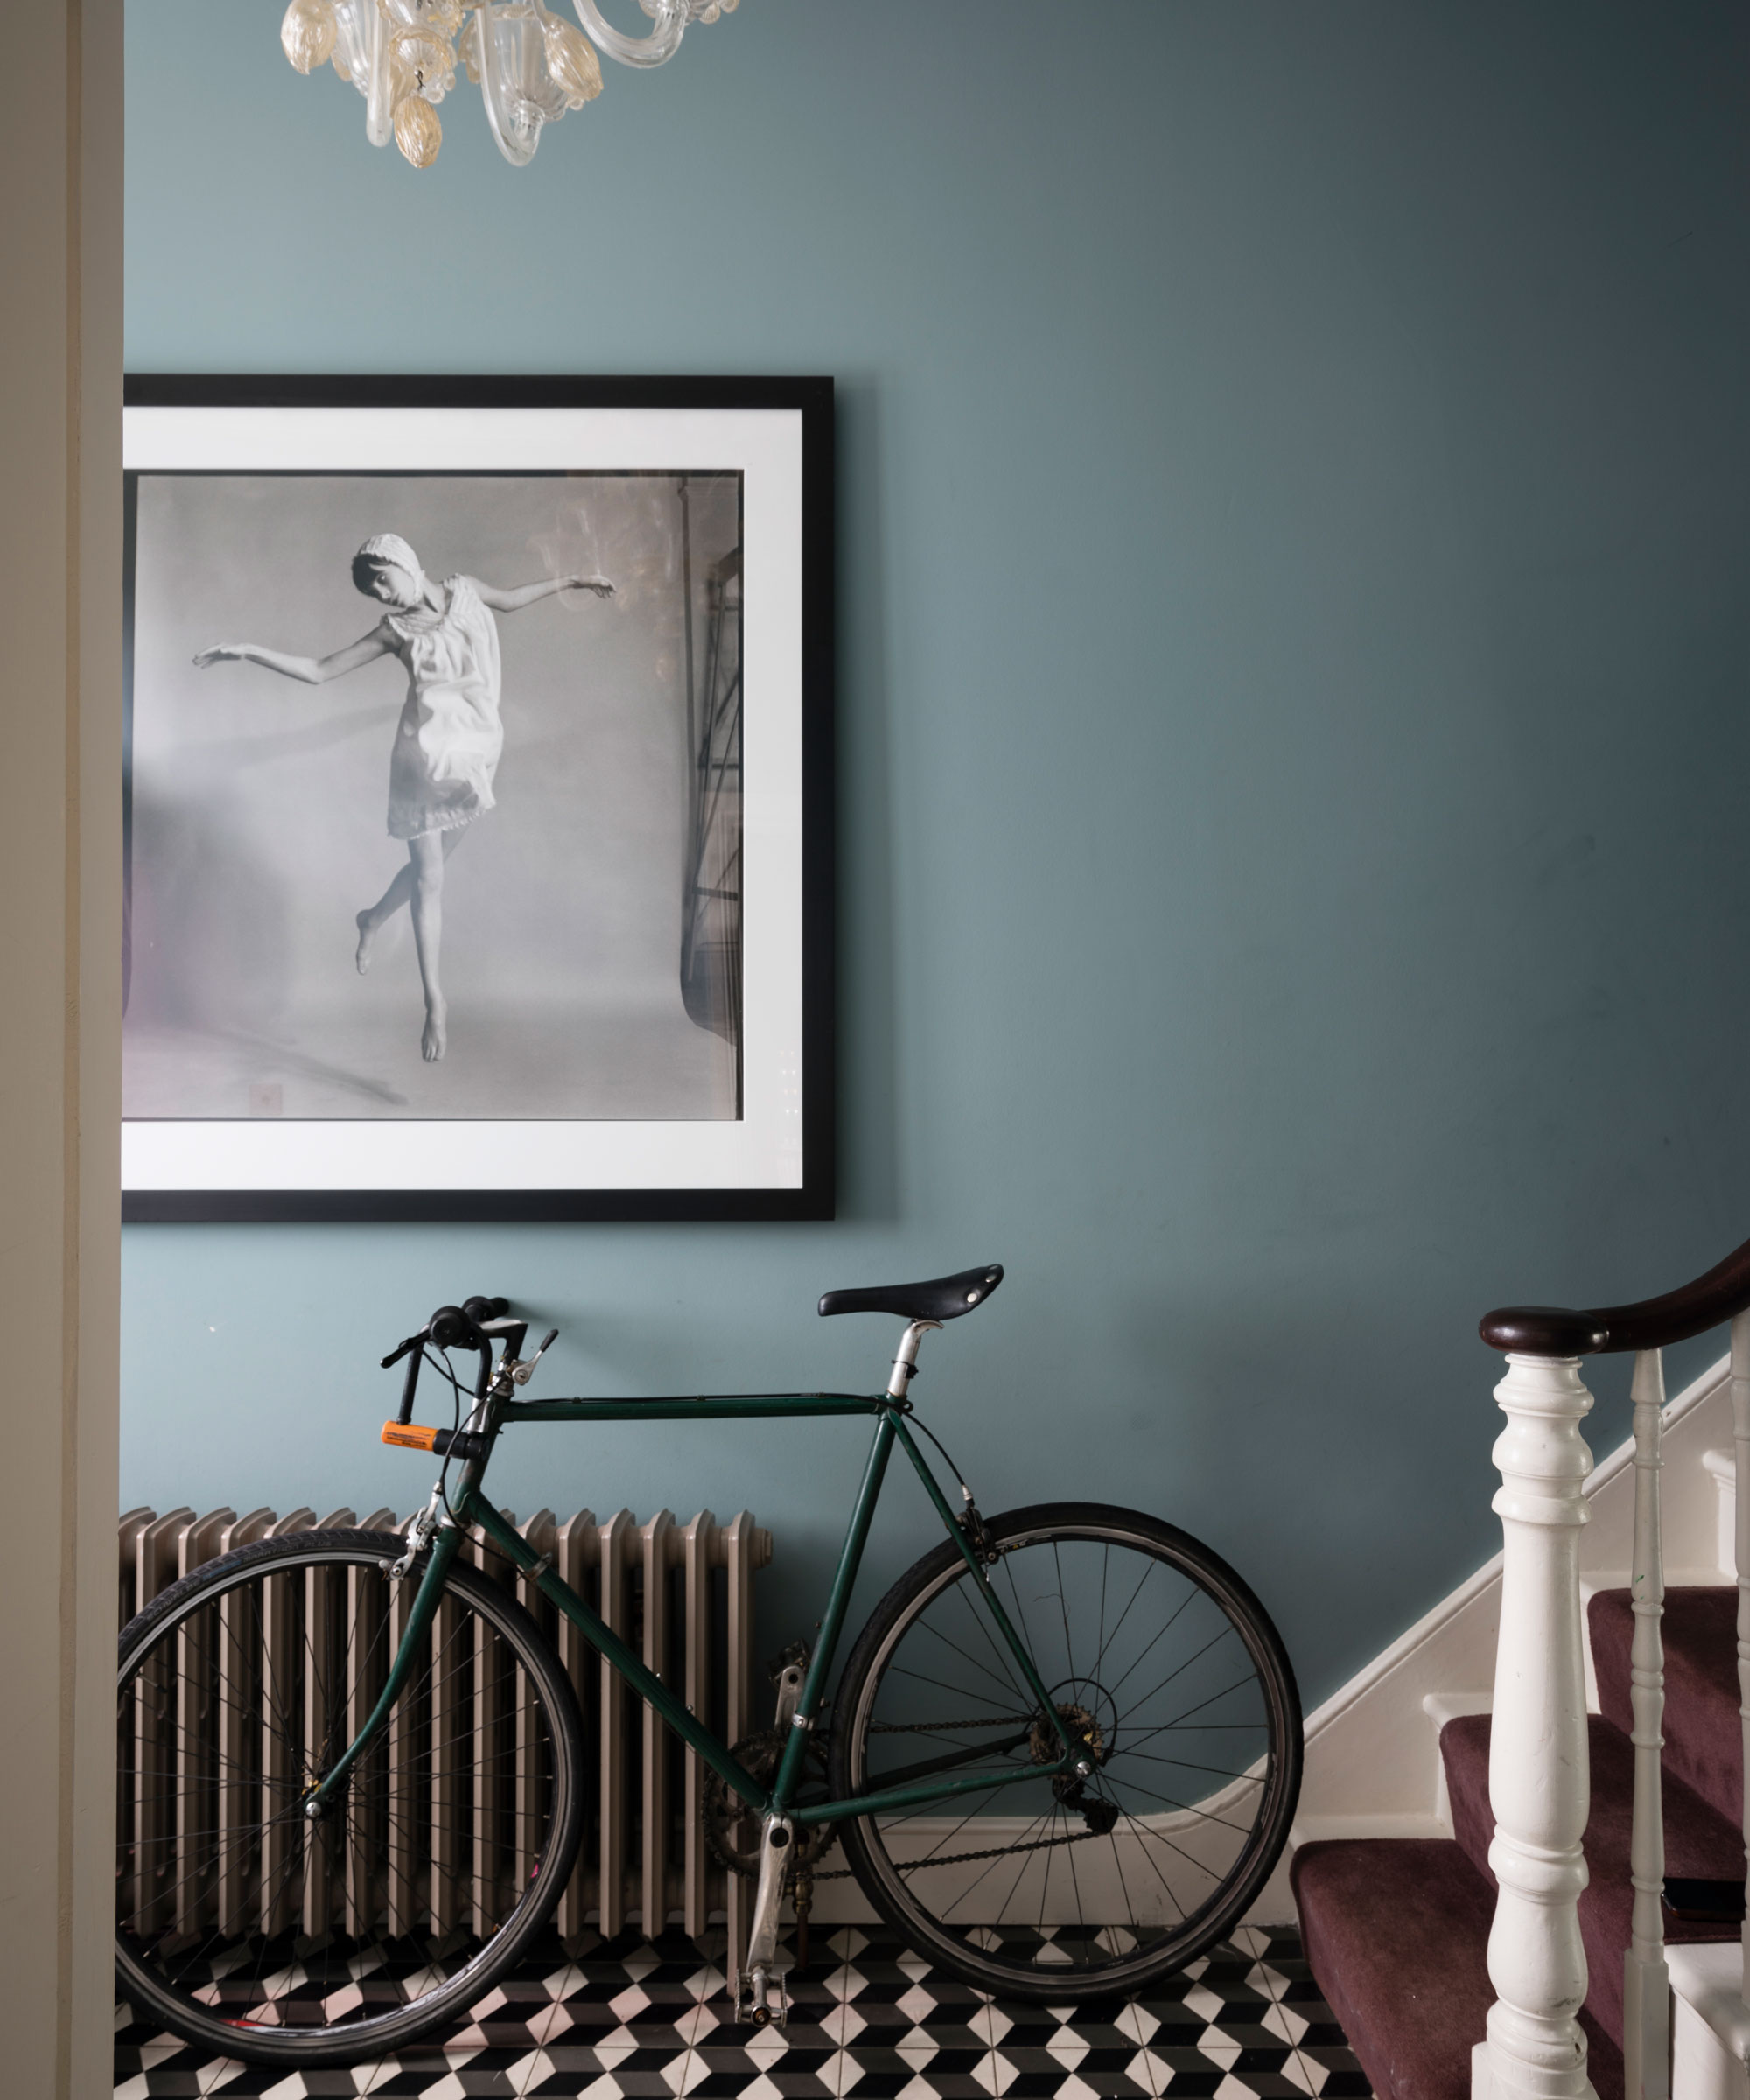 an elegant hallways in a modern home, with black and white tiled floor, a blue wall, a traditional staircase with white and brown bannister, a bicycle up against the wrought-iron radiator, and a painting of a dancing girl hanging on the wall